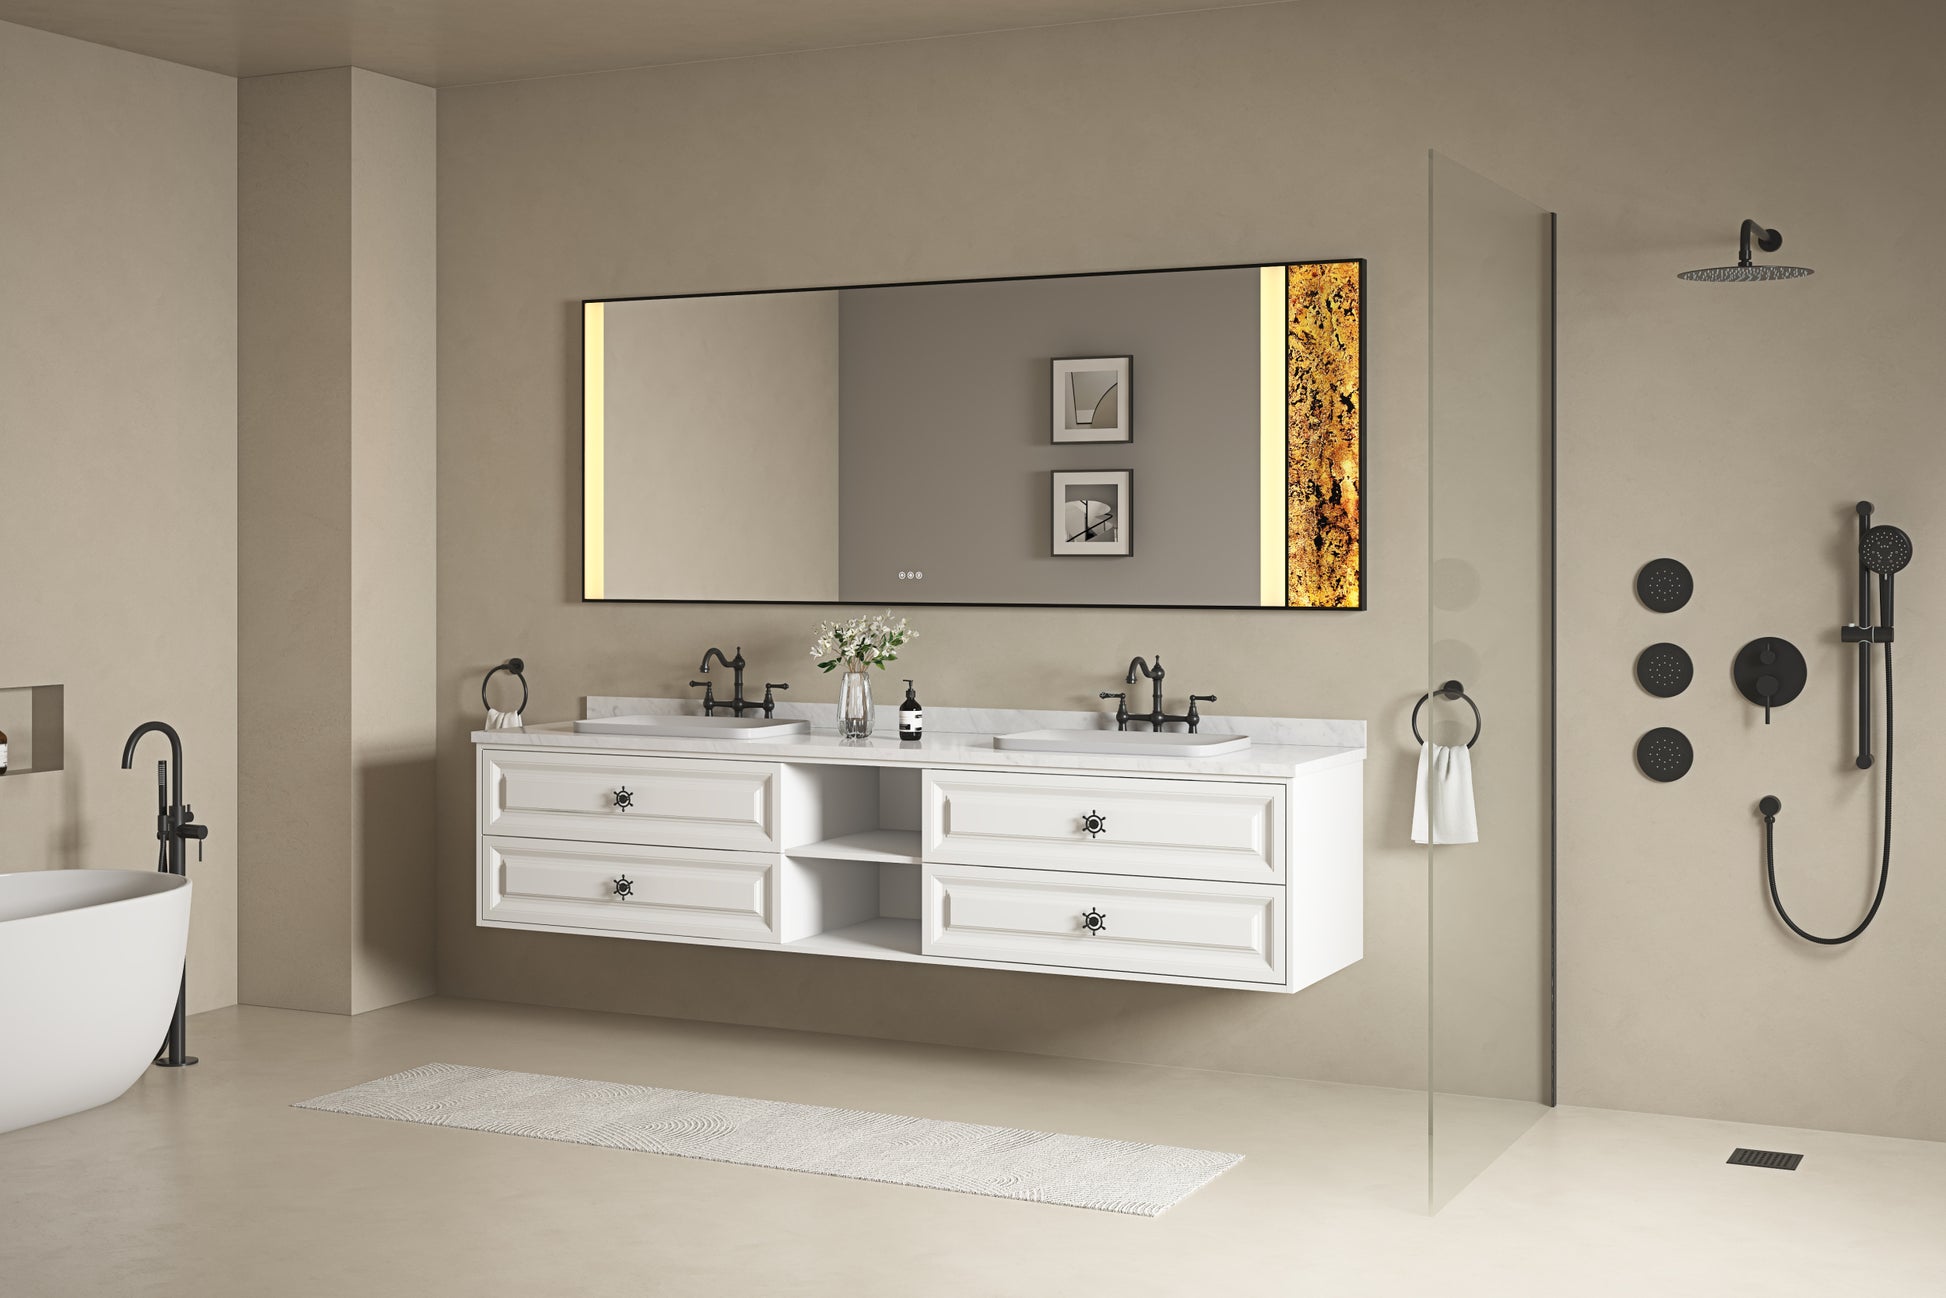 96*23*21in Wall Hung Doulble Sink Bath Vanity Cabinet white-abs+steel(q235)+wood+pvc